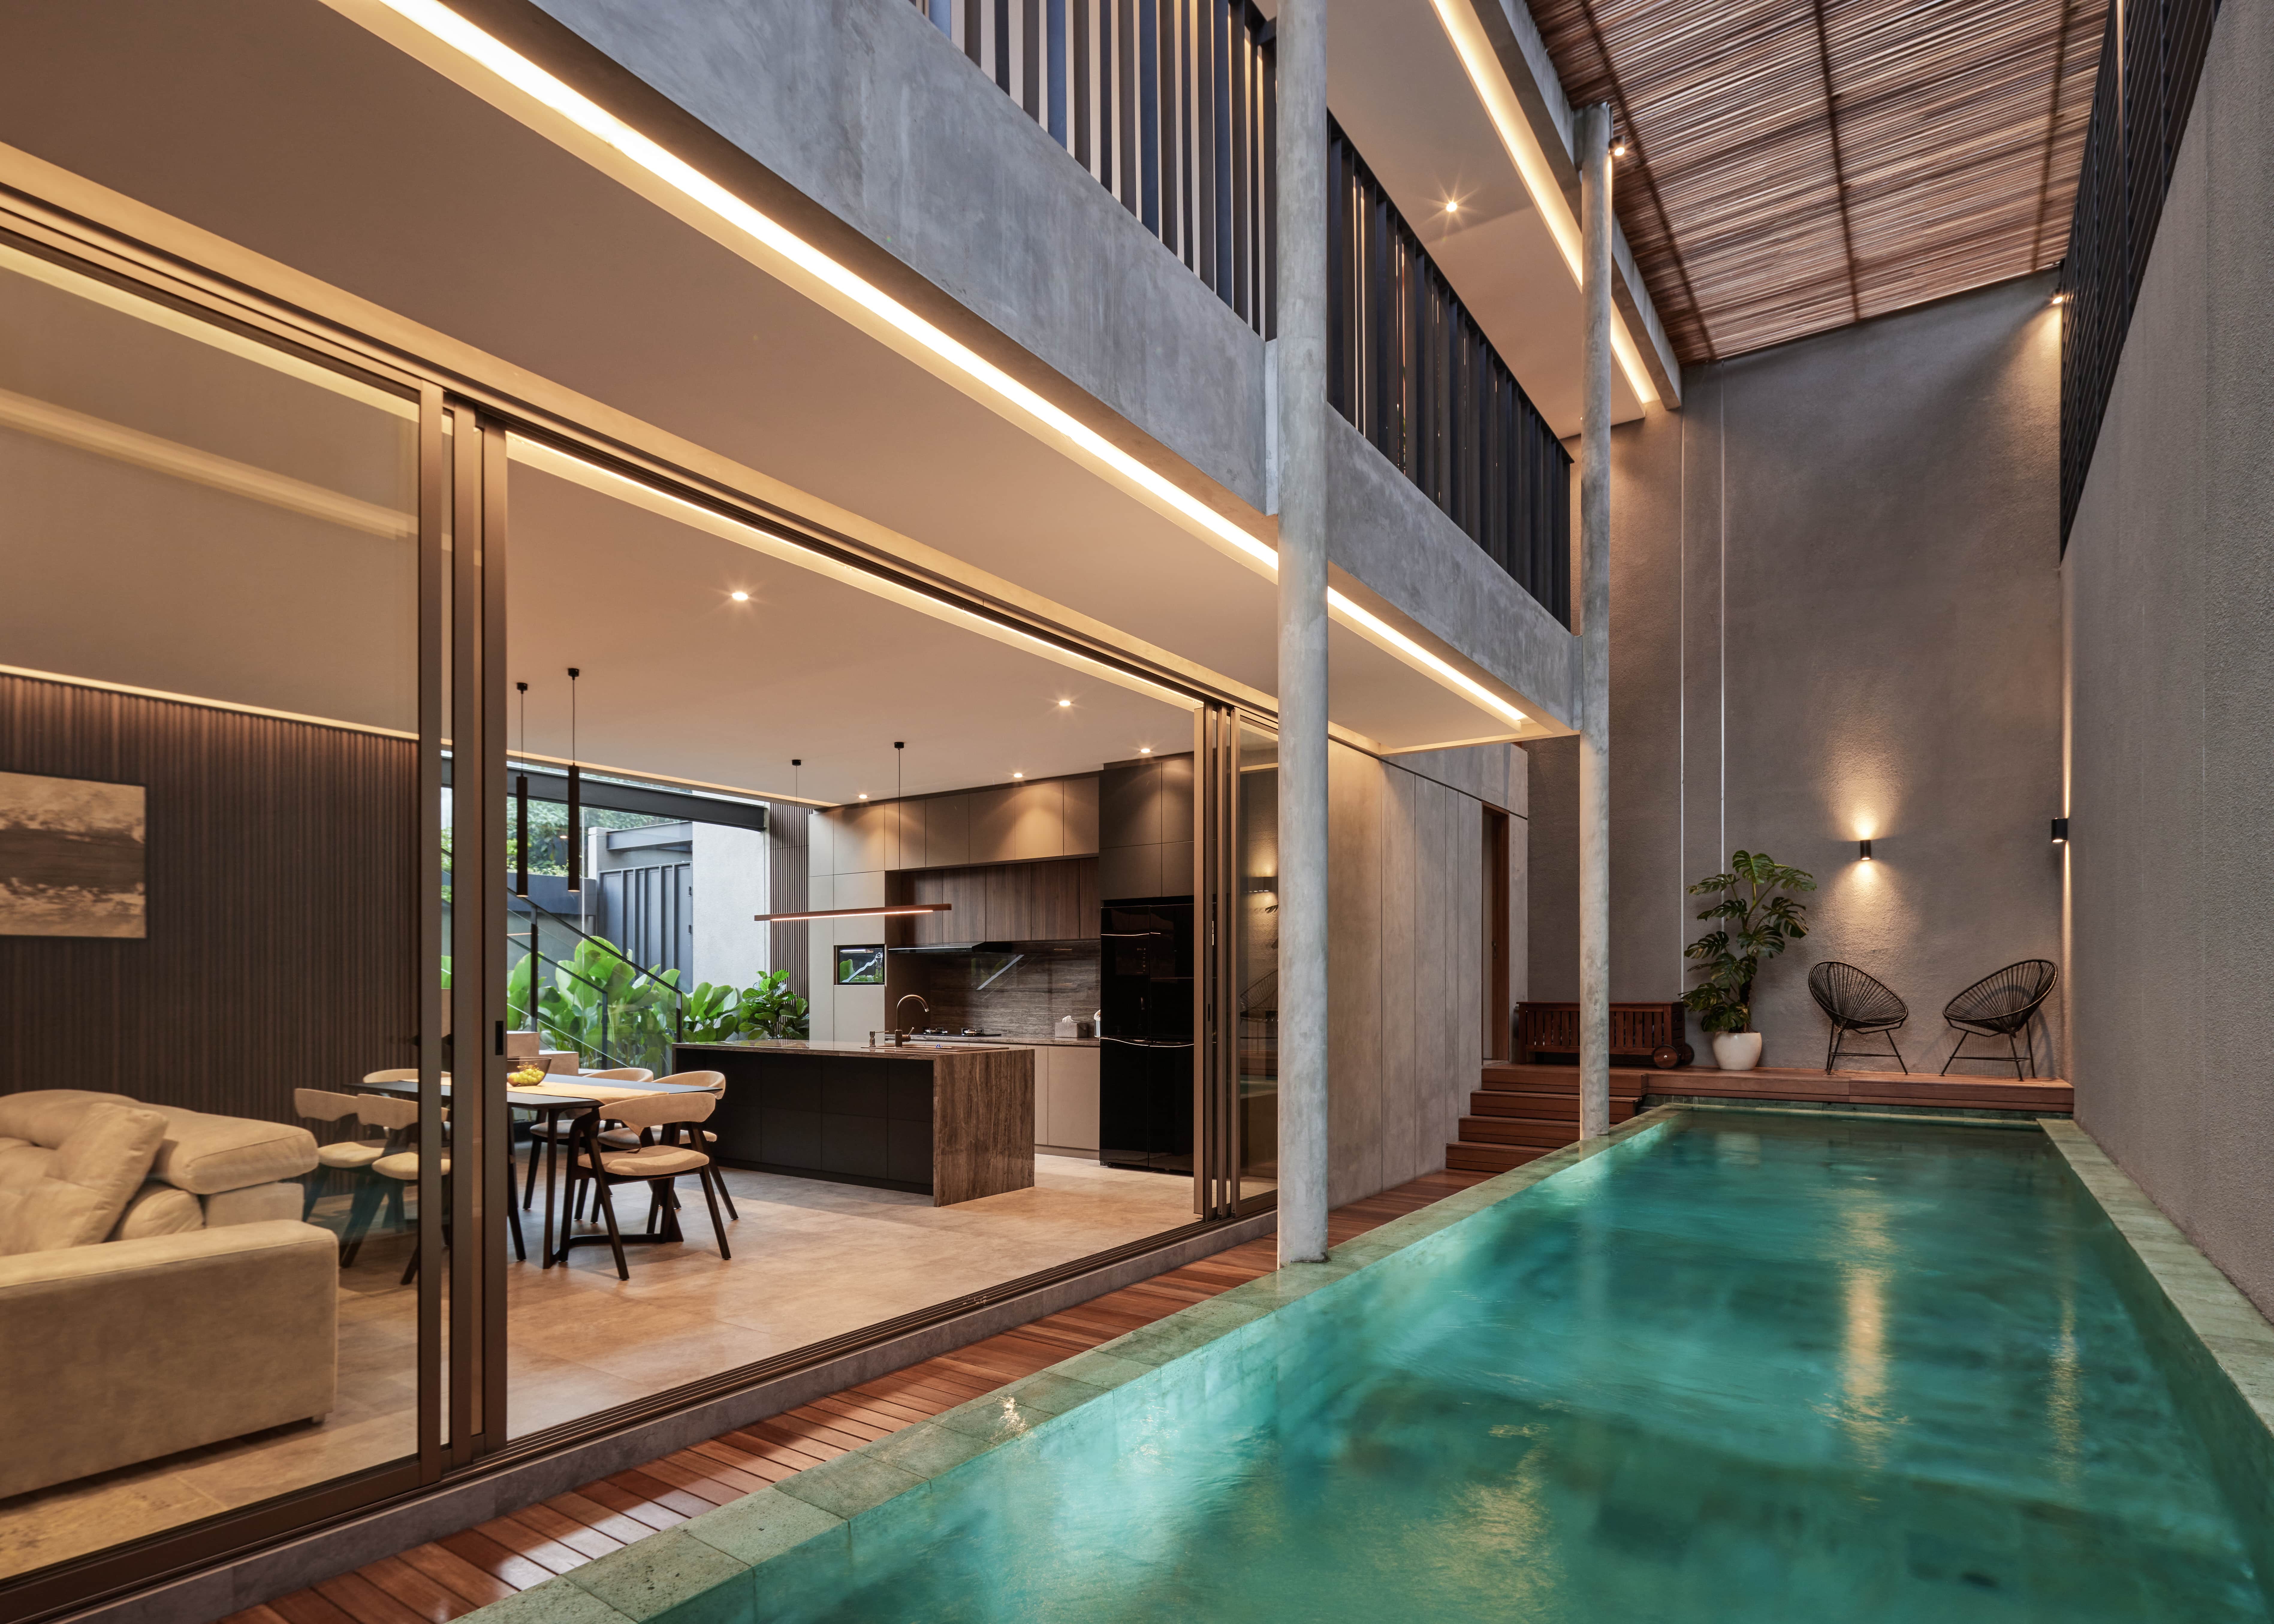 the presence of an indoor swimming pool that makes the house more lively